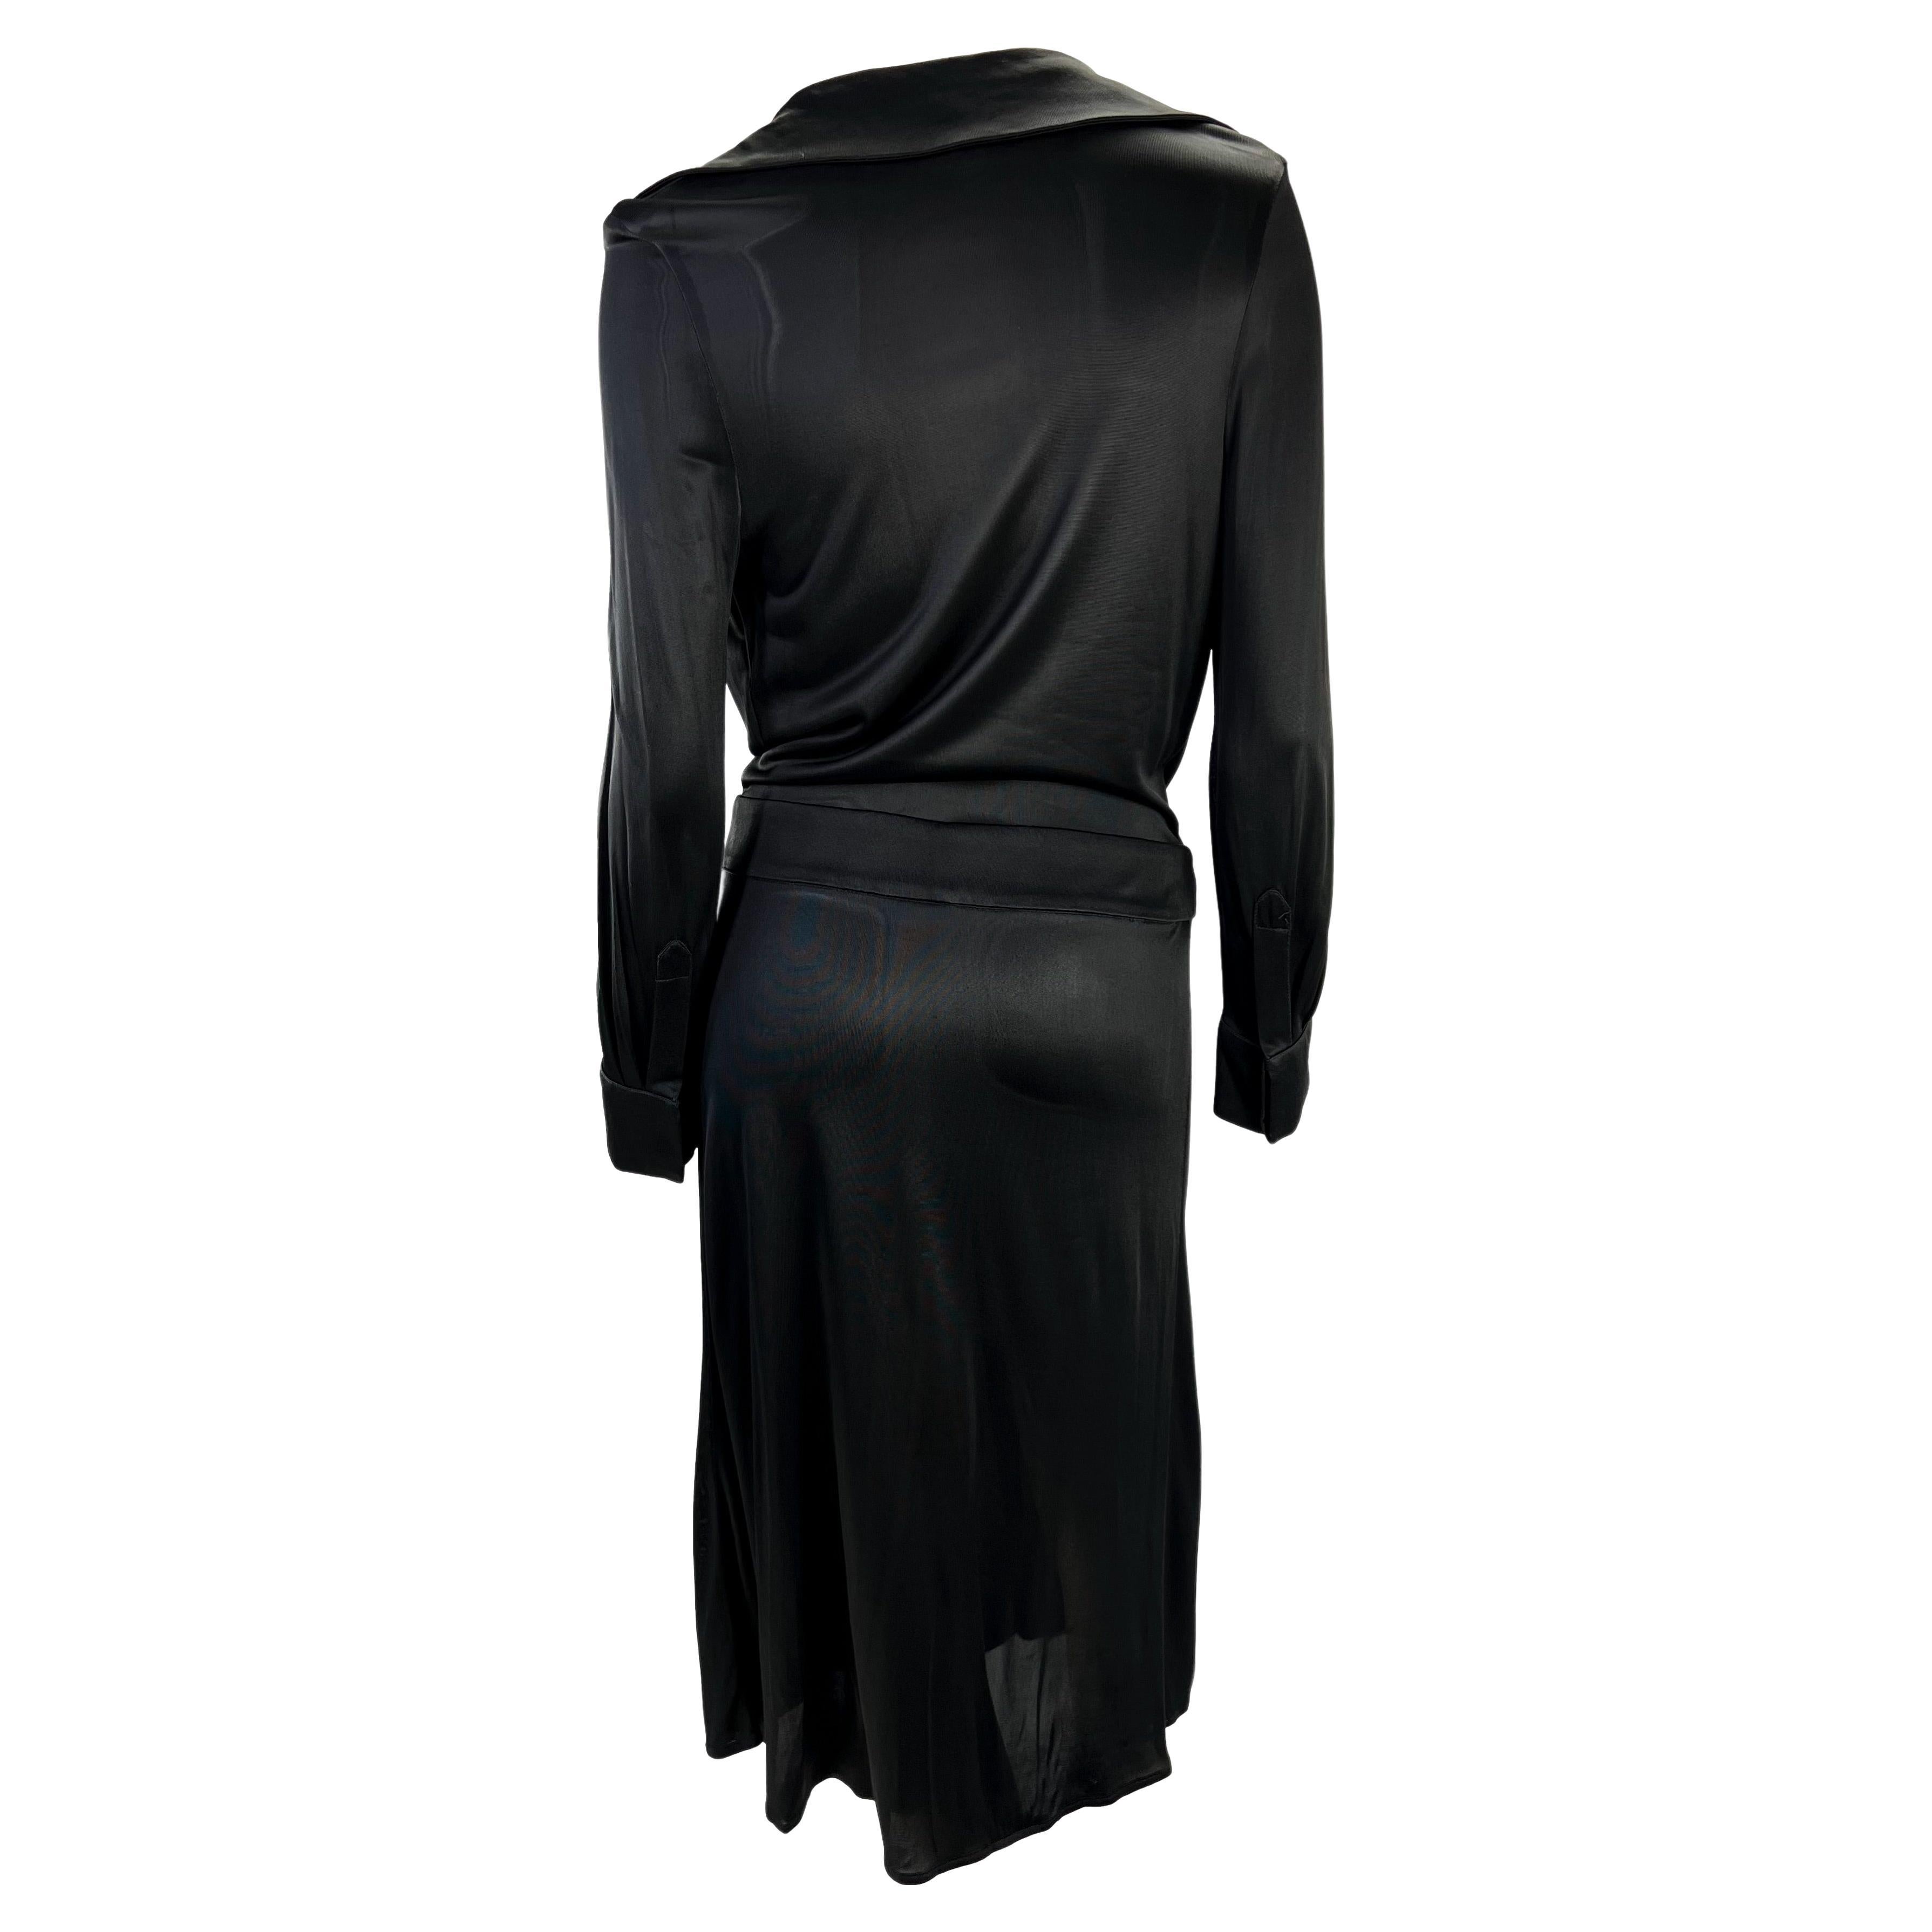 S/S 2000 Gucci by Tom Ford Runway Plunging Neckline Black Viscose Runway Dress 4